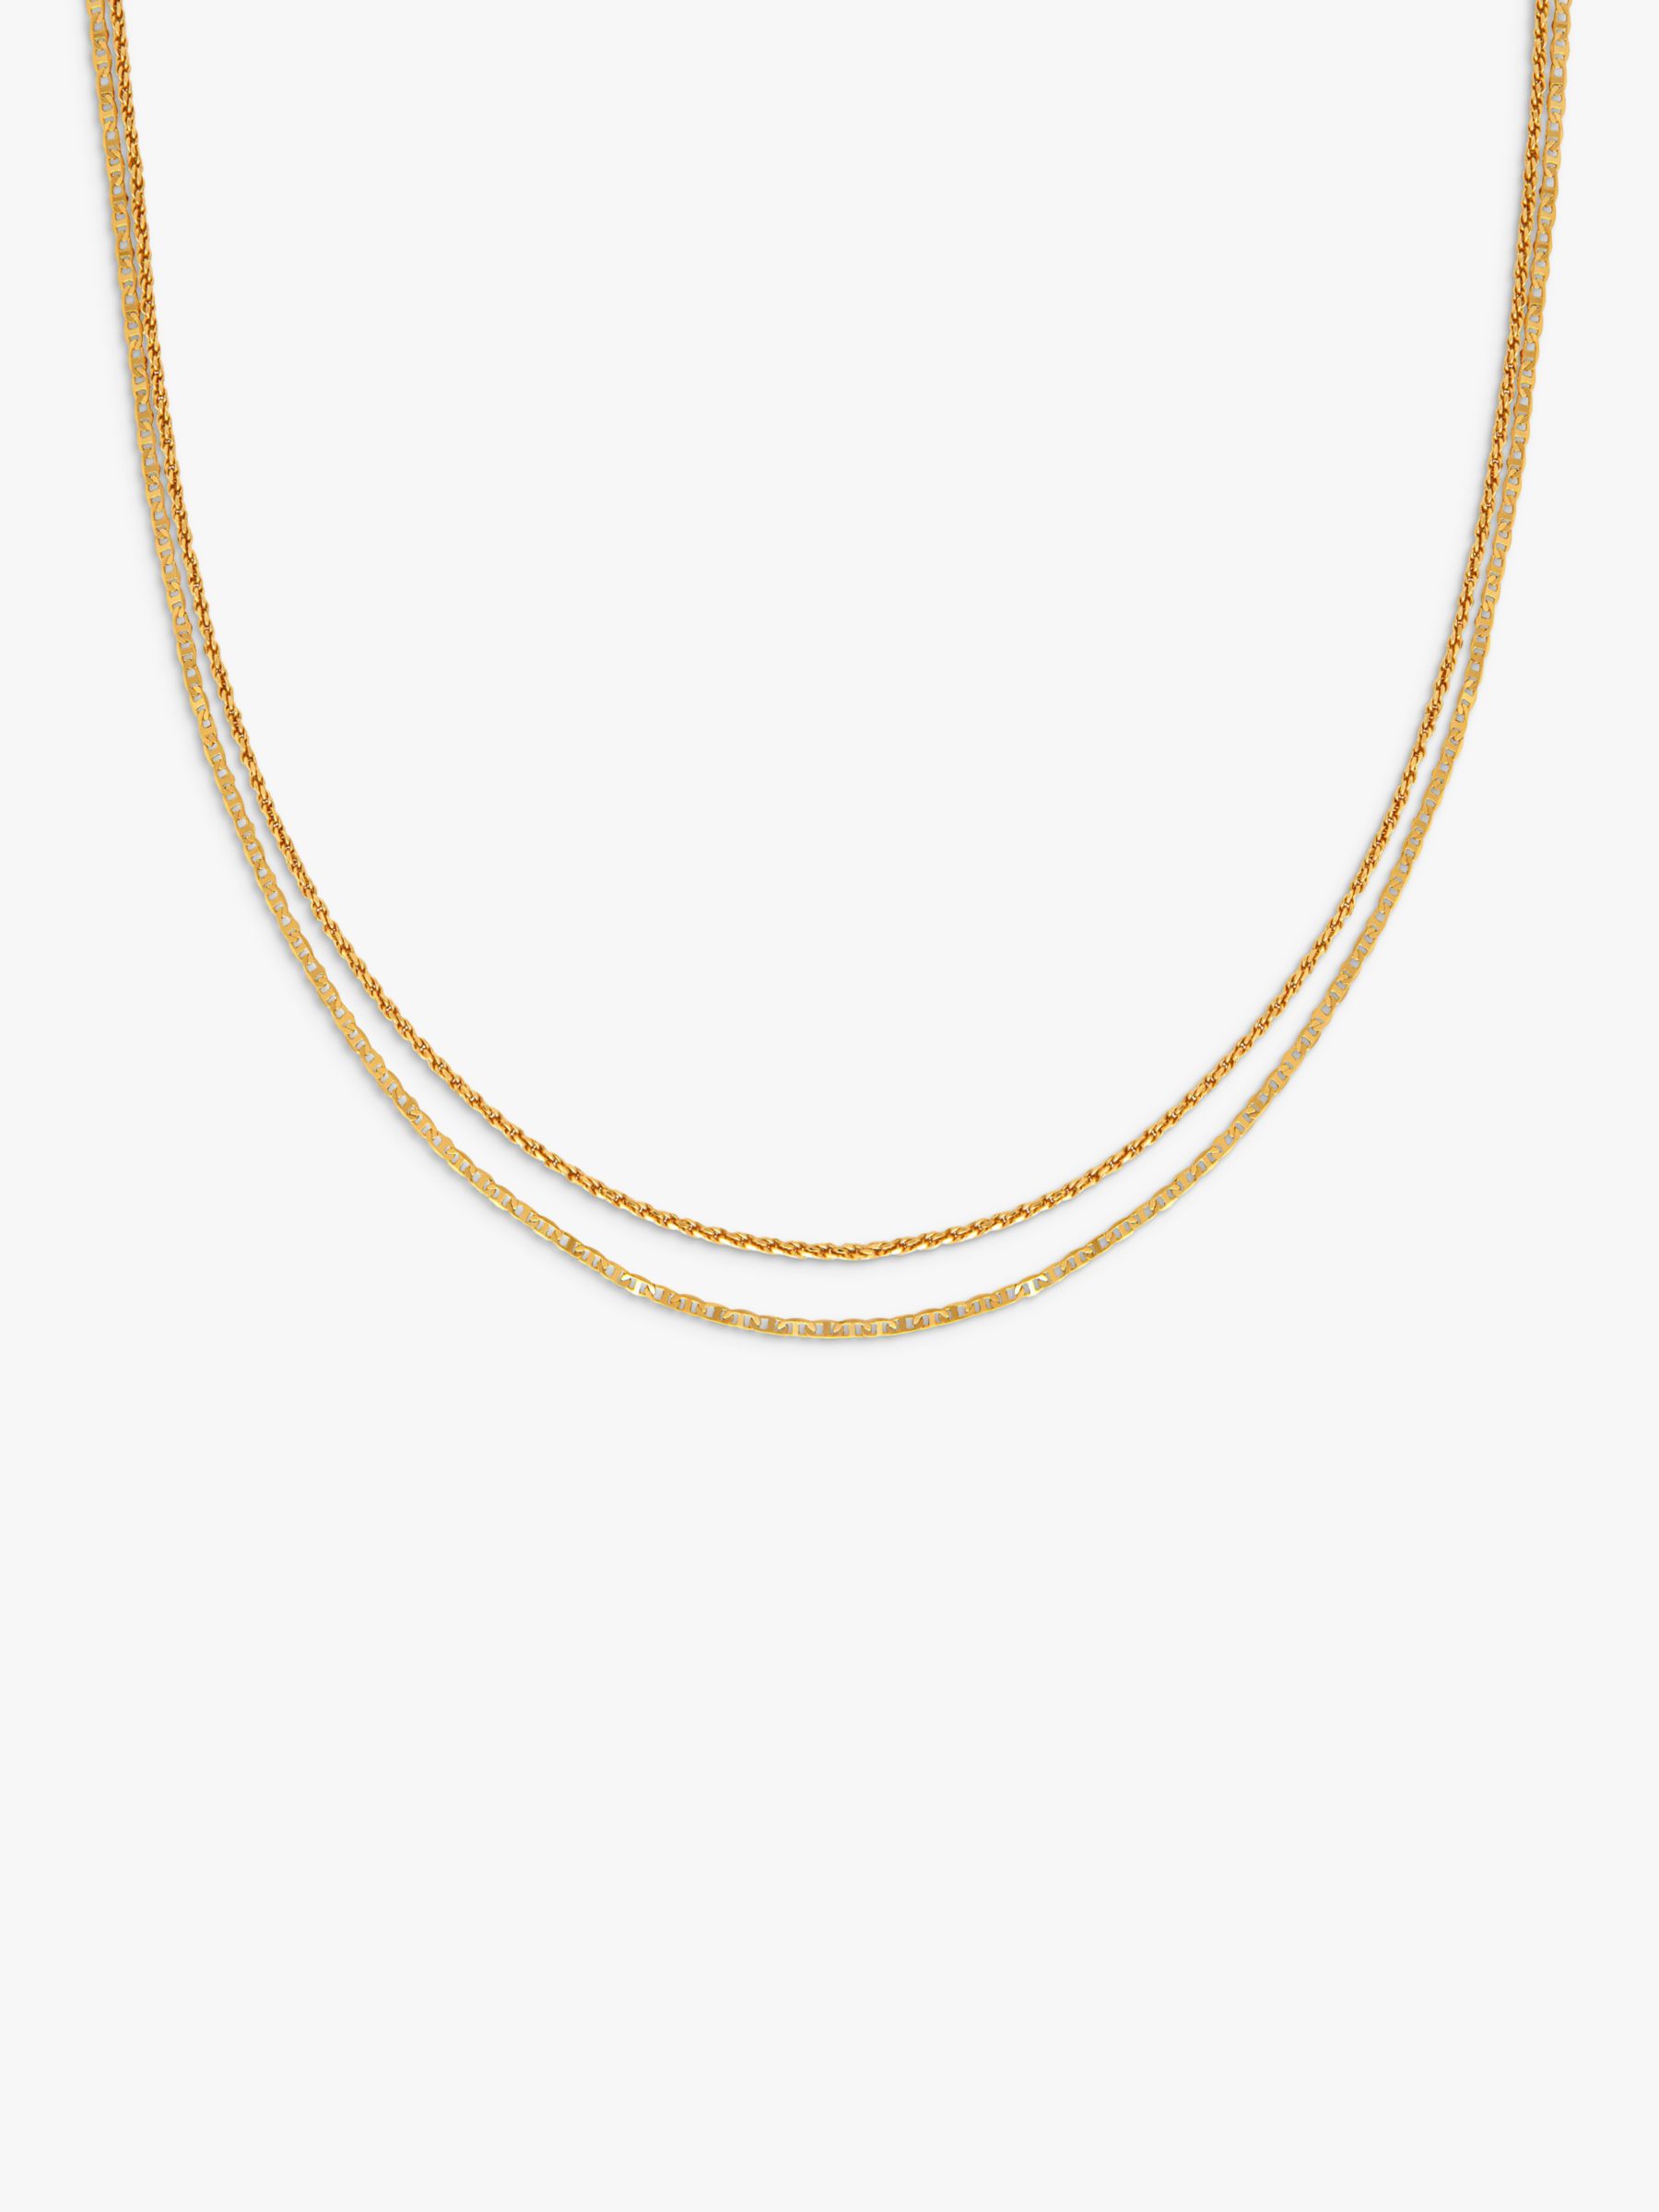 Astrid & Miyu Duo Chain Necklace, Gold at John Lewis & Partners